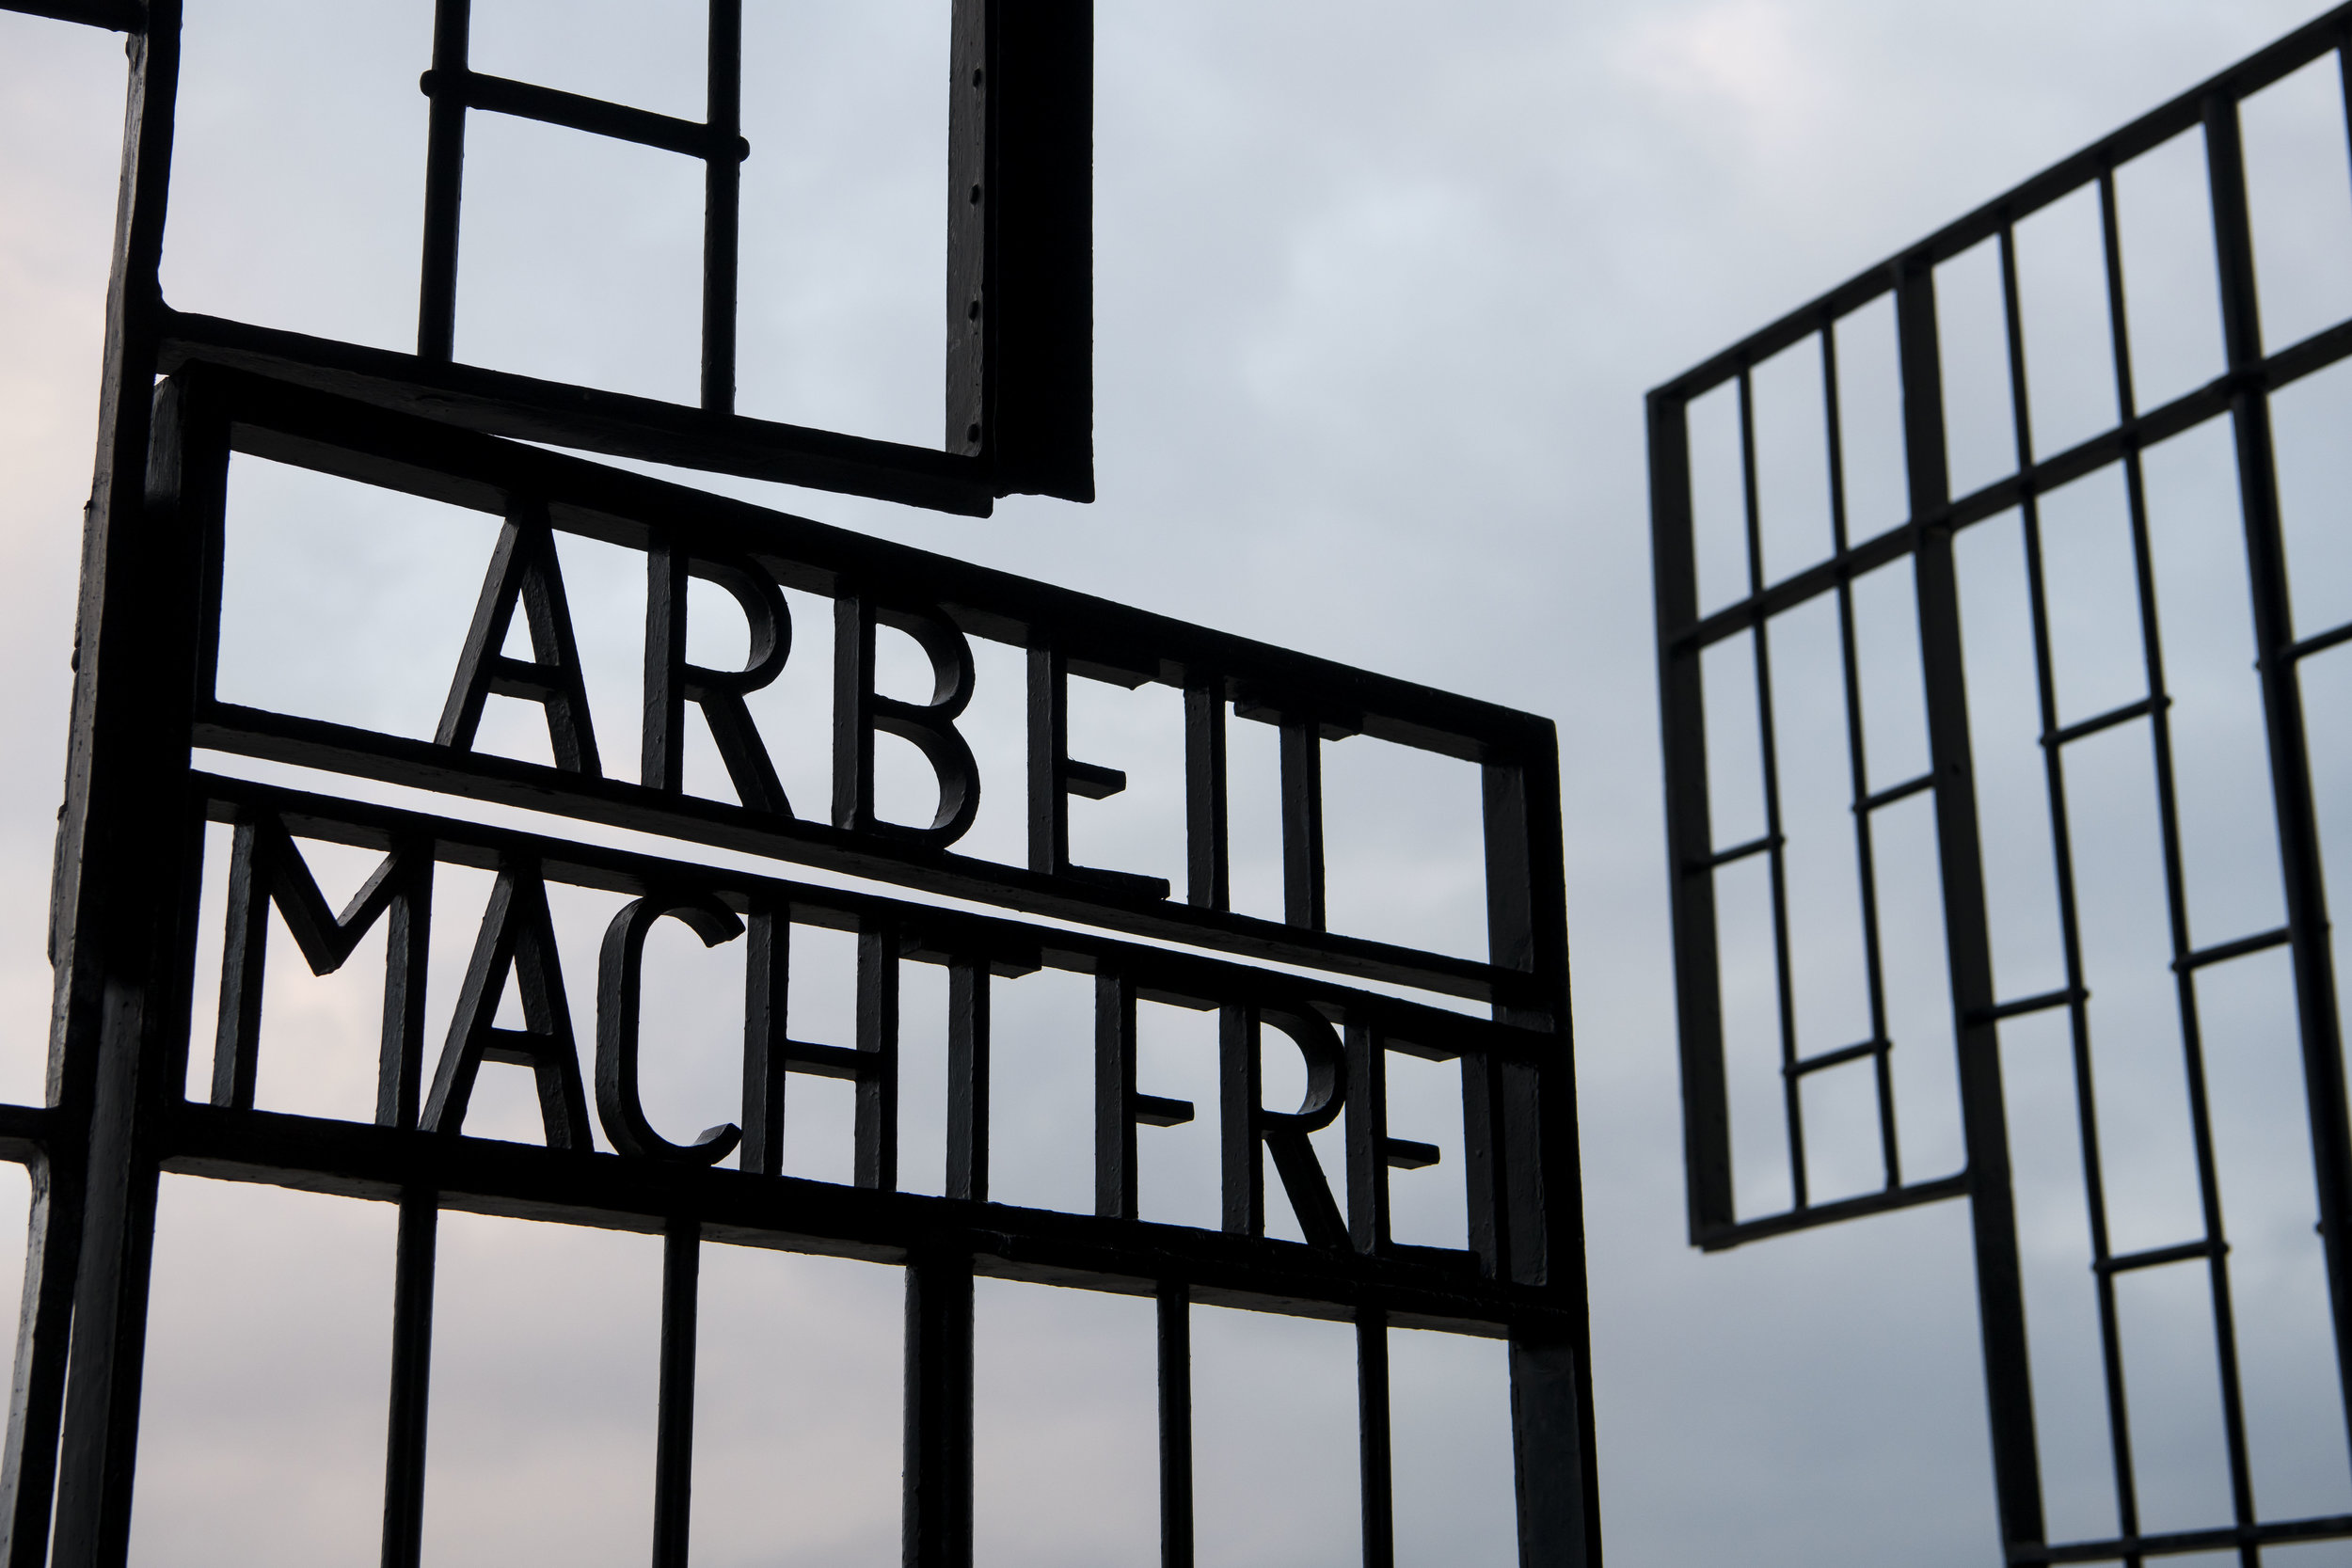  Sachsenhausen was a Nazi concentration camp in Oranienburg, Berlin, Germany, used primarily for political prisoners from 1936 to the end of the Third Reich in May 1945. 